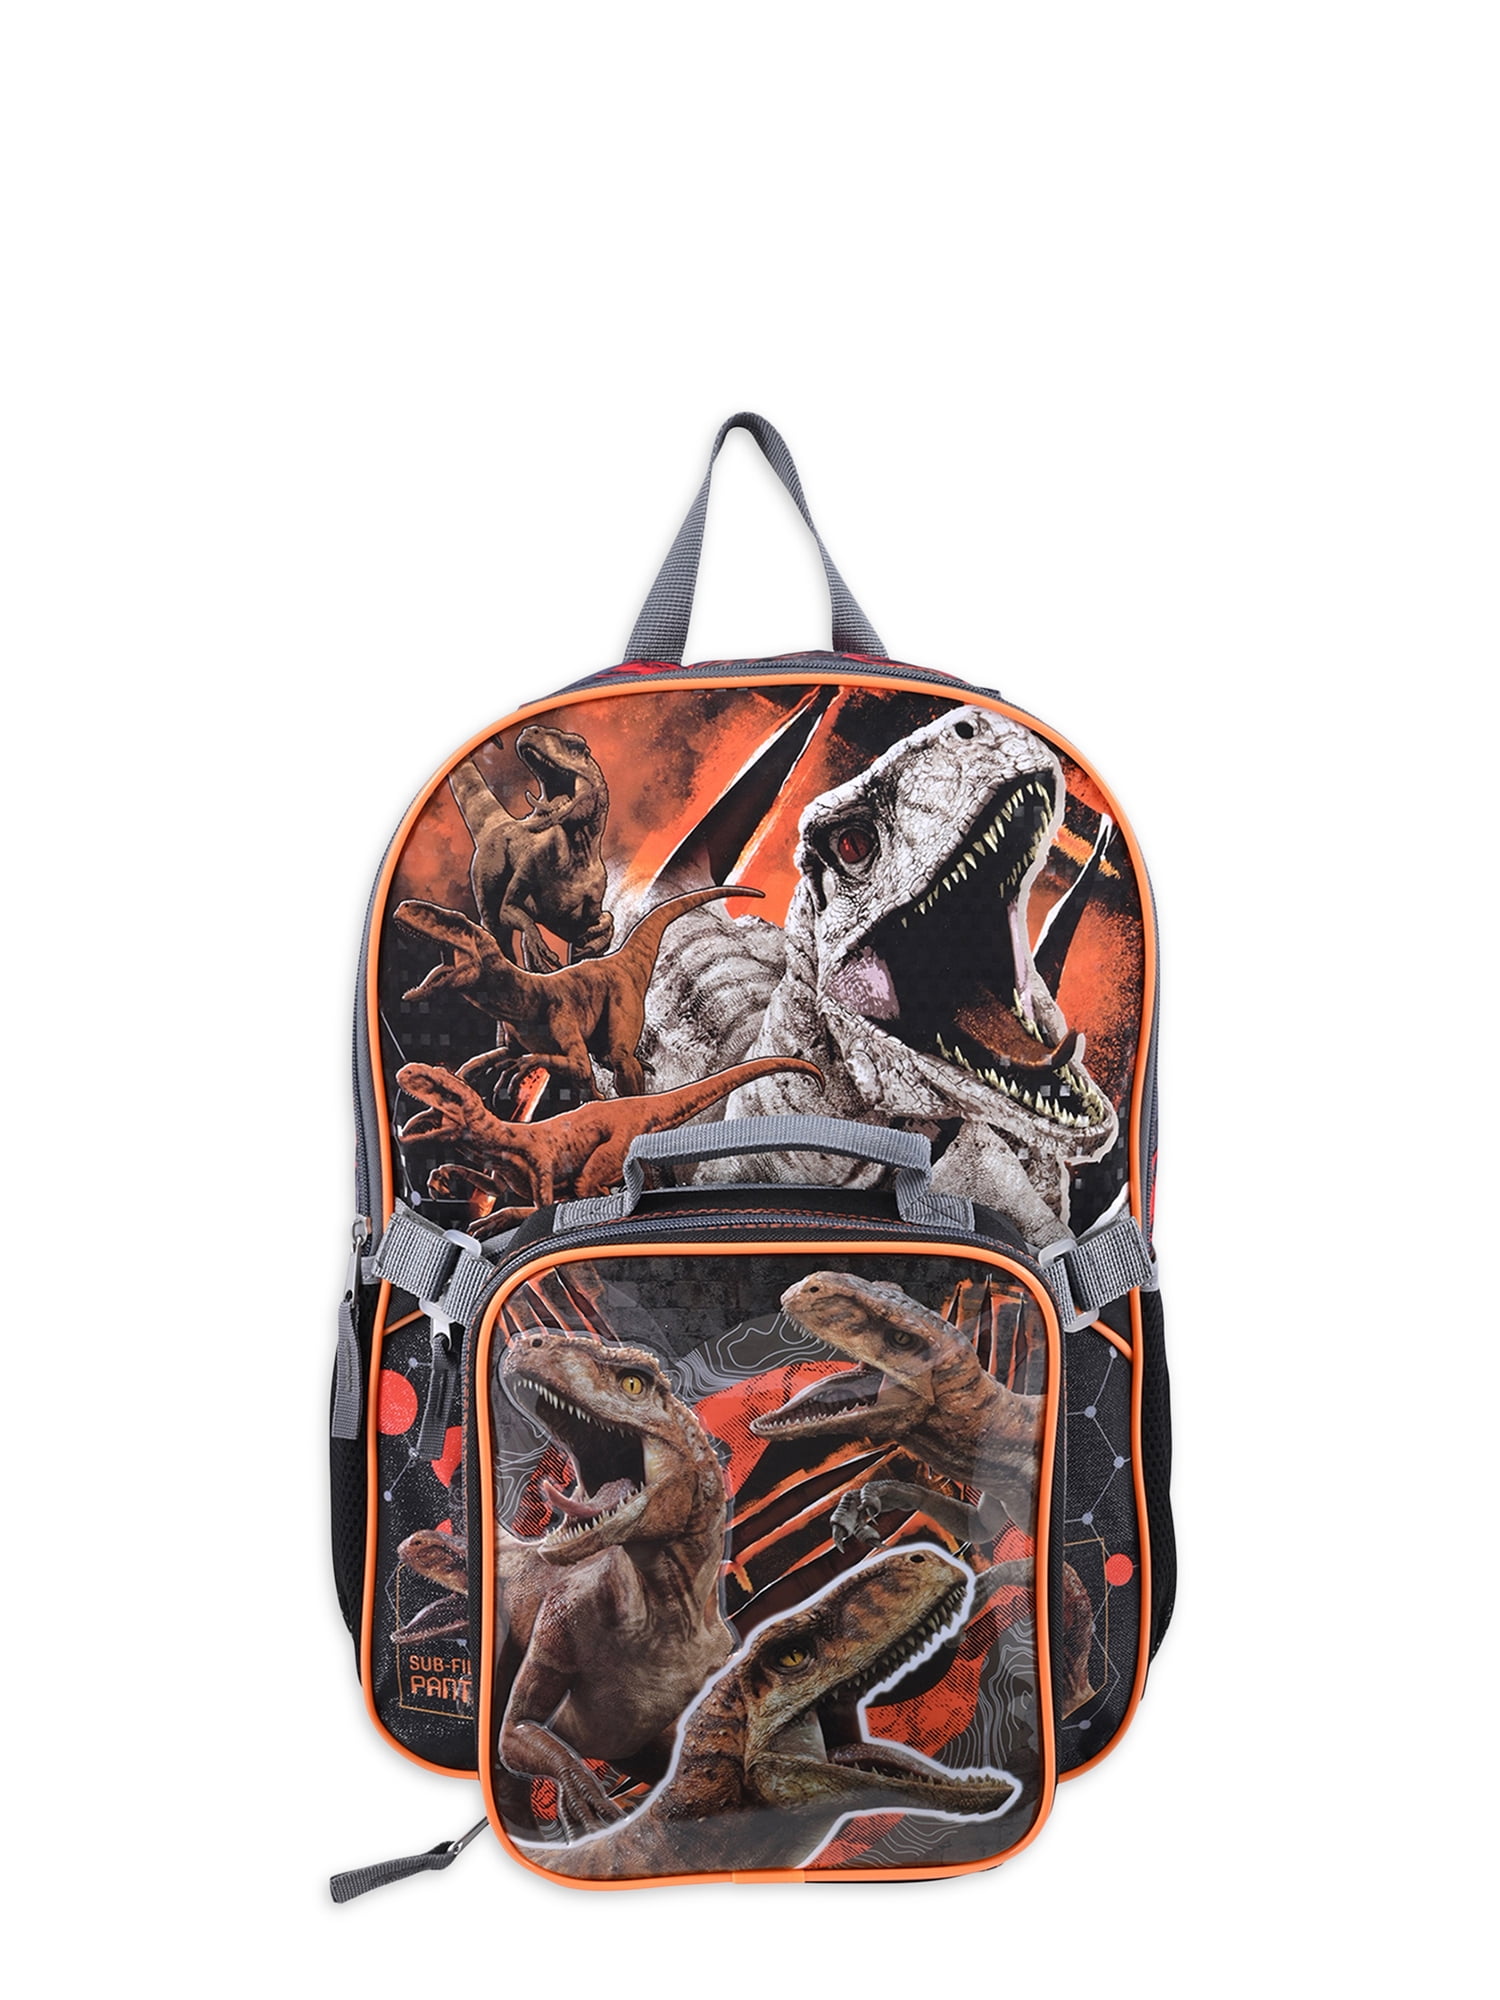 2-Piece Kids' 17" Laptop Backpack w/ Lunch Bag: Jurassic World $8.24, Spider-Man $10.07 + Free Shipping w/ Walmart+ or on $35+